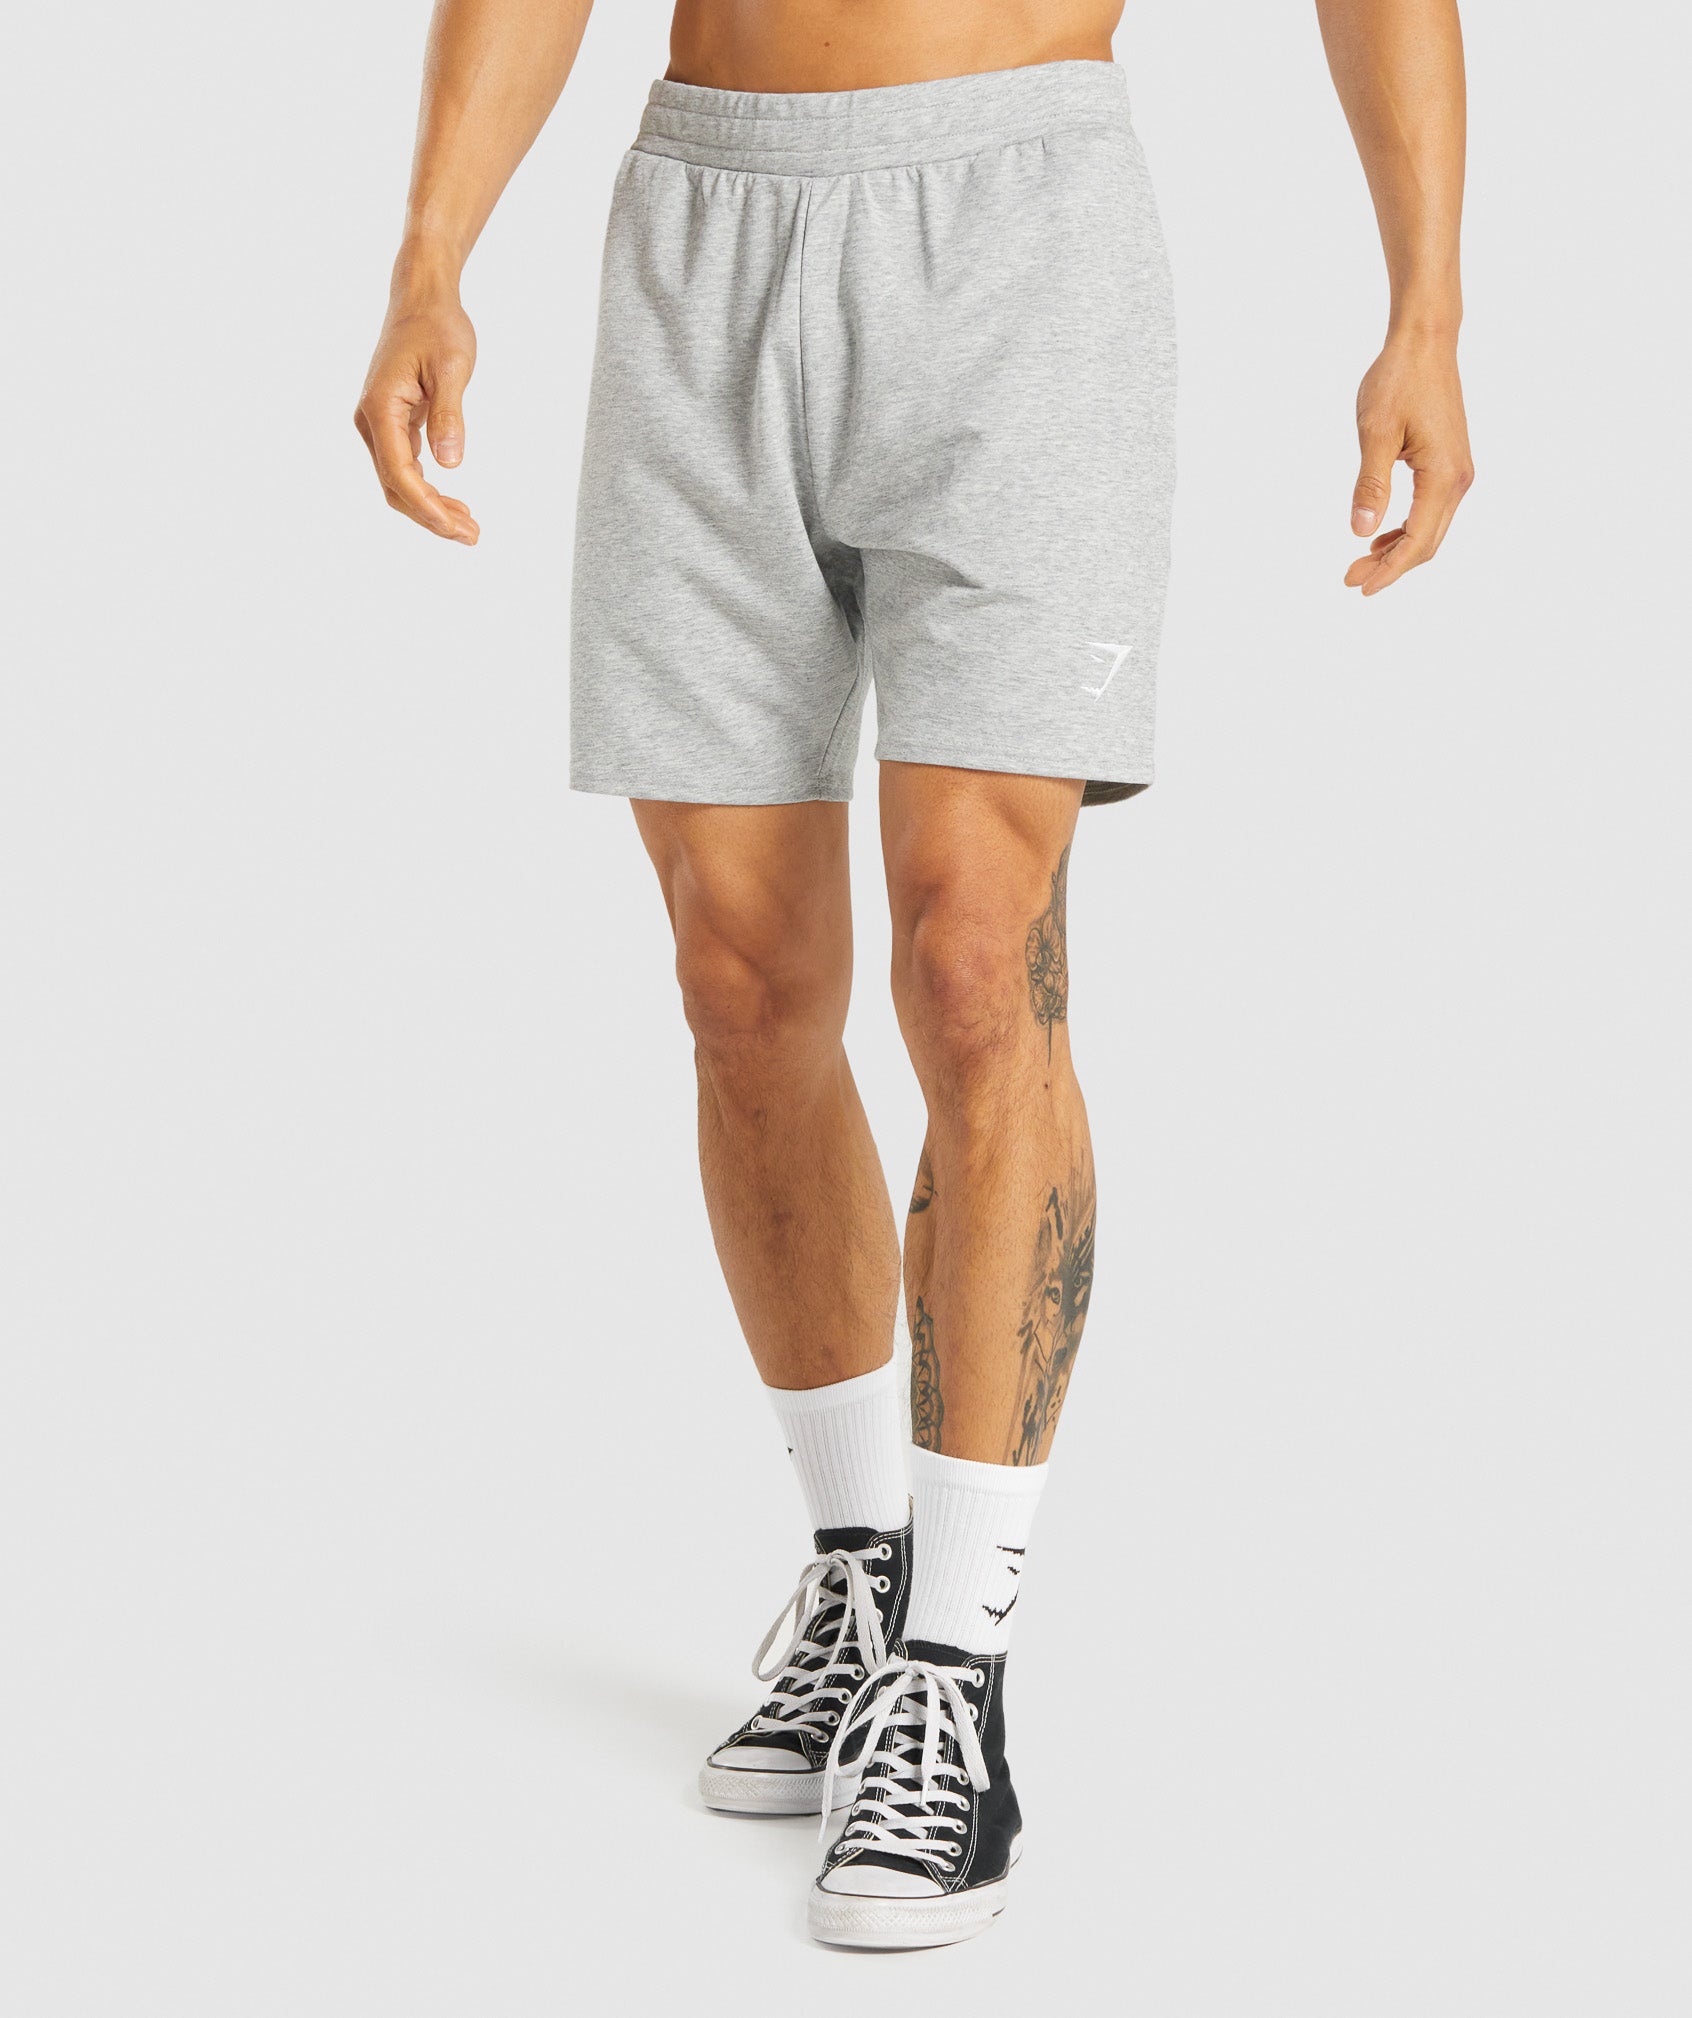 Essential 7” Shorts in Light Grey Marl - view 1